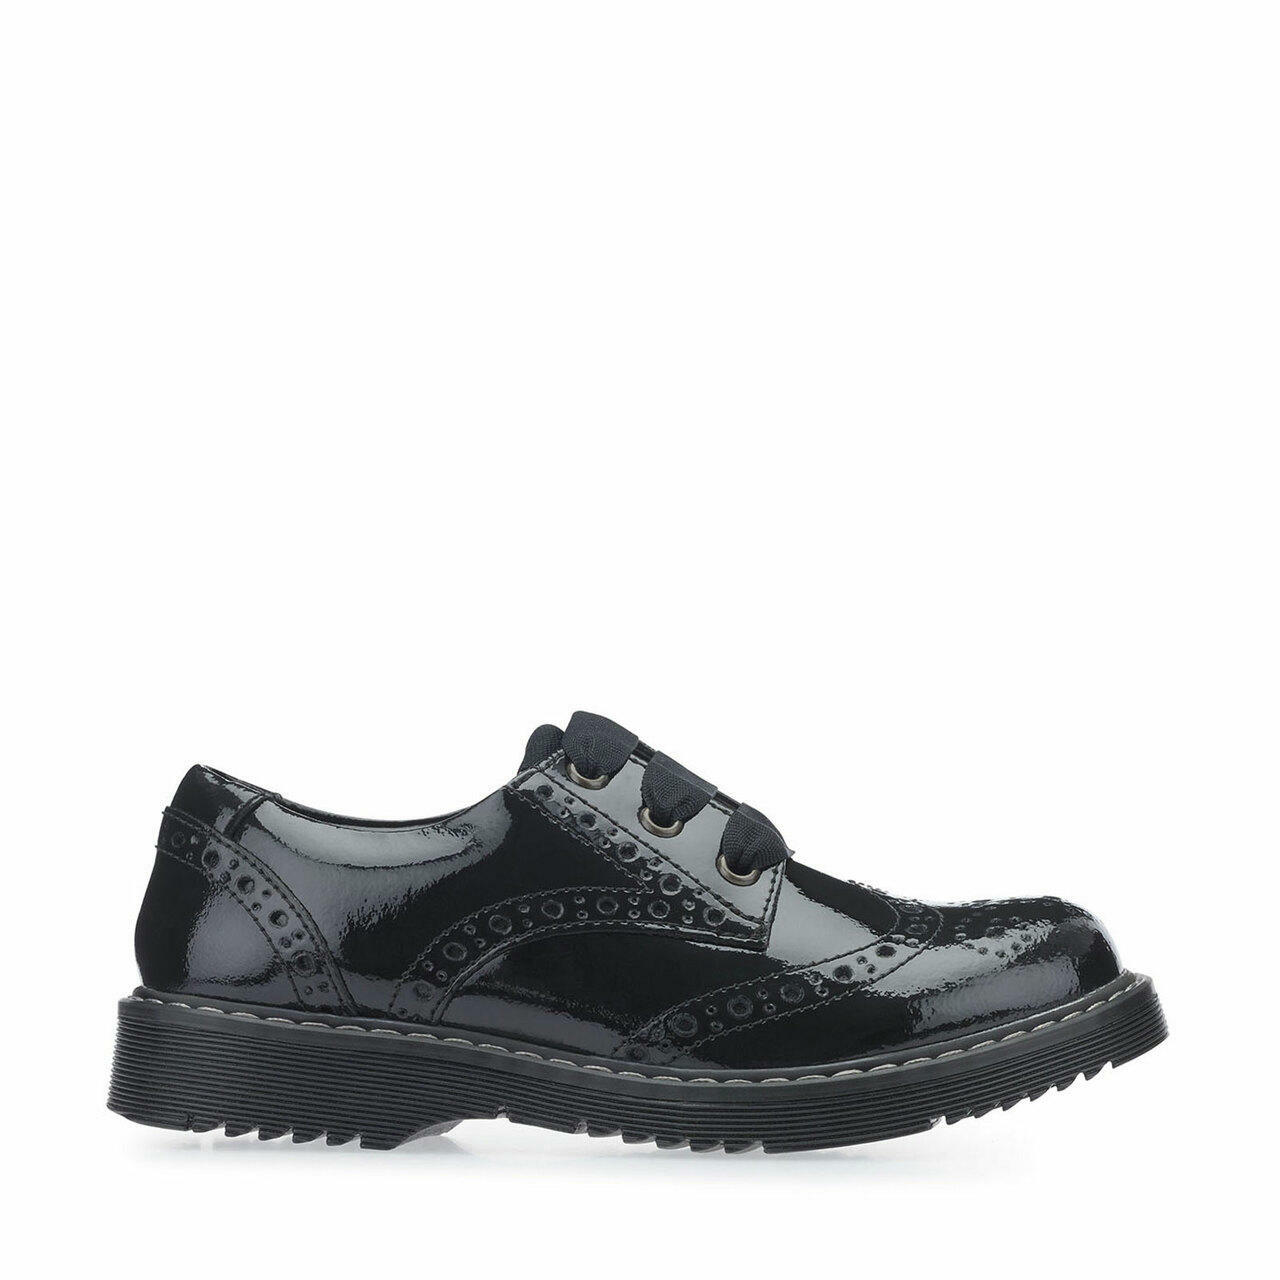 A girls school shoe by Start Rite, style Impulsive, in black patent with lace up fastening. Right side view.